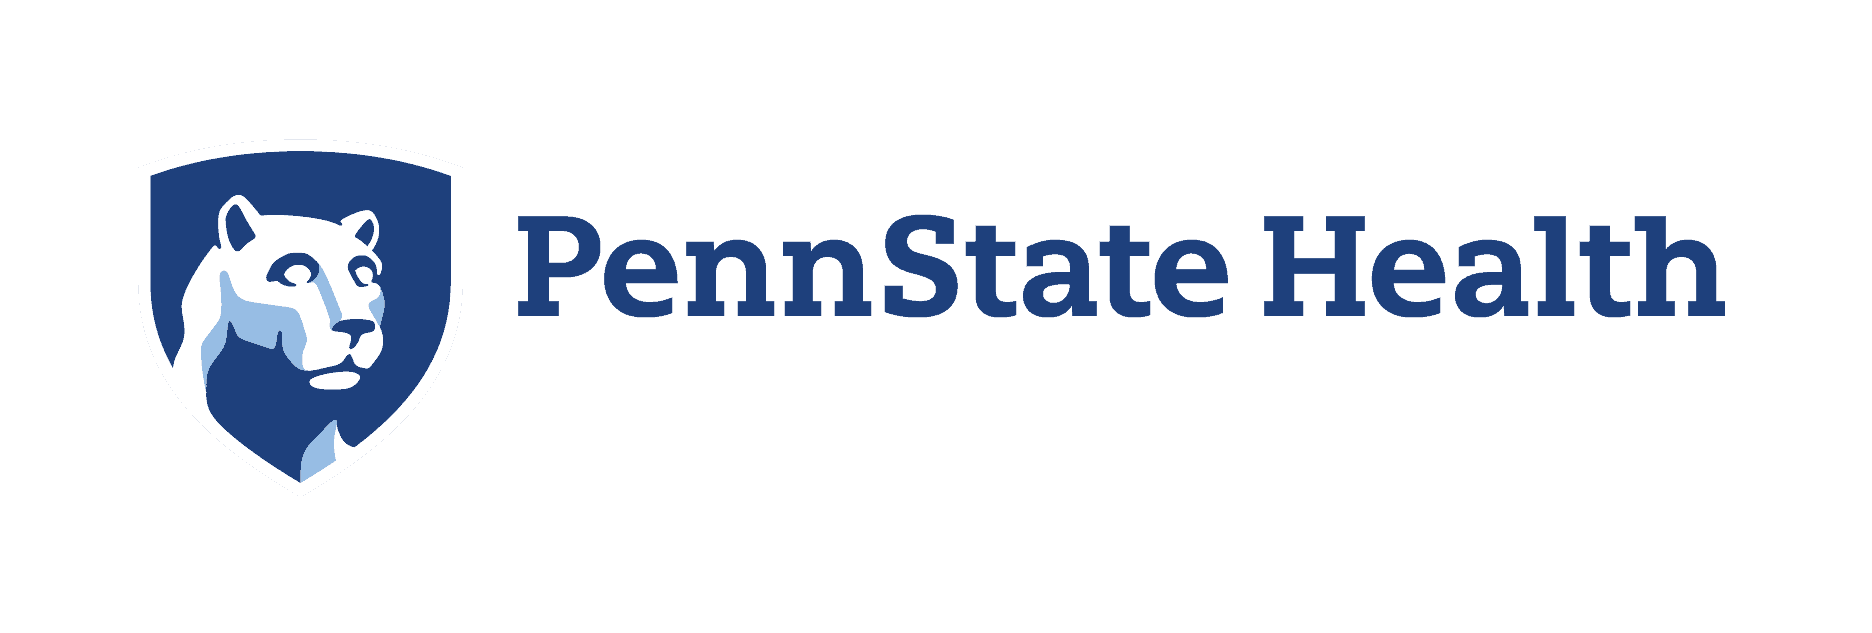 Logo of penn state health featuring a stylized lion's head.